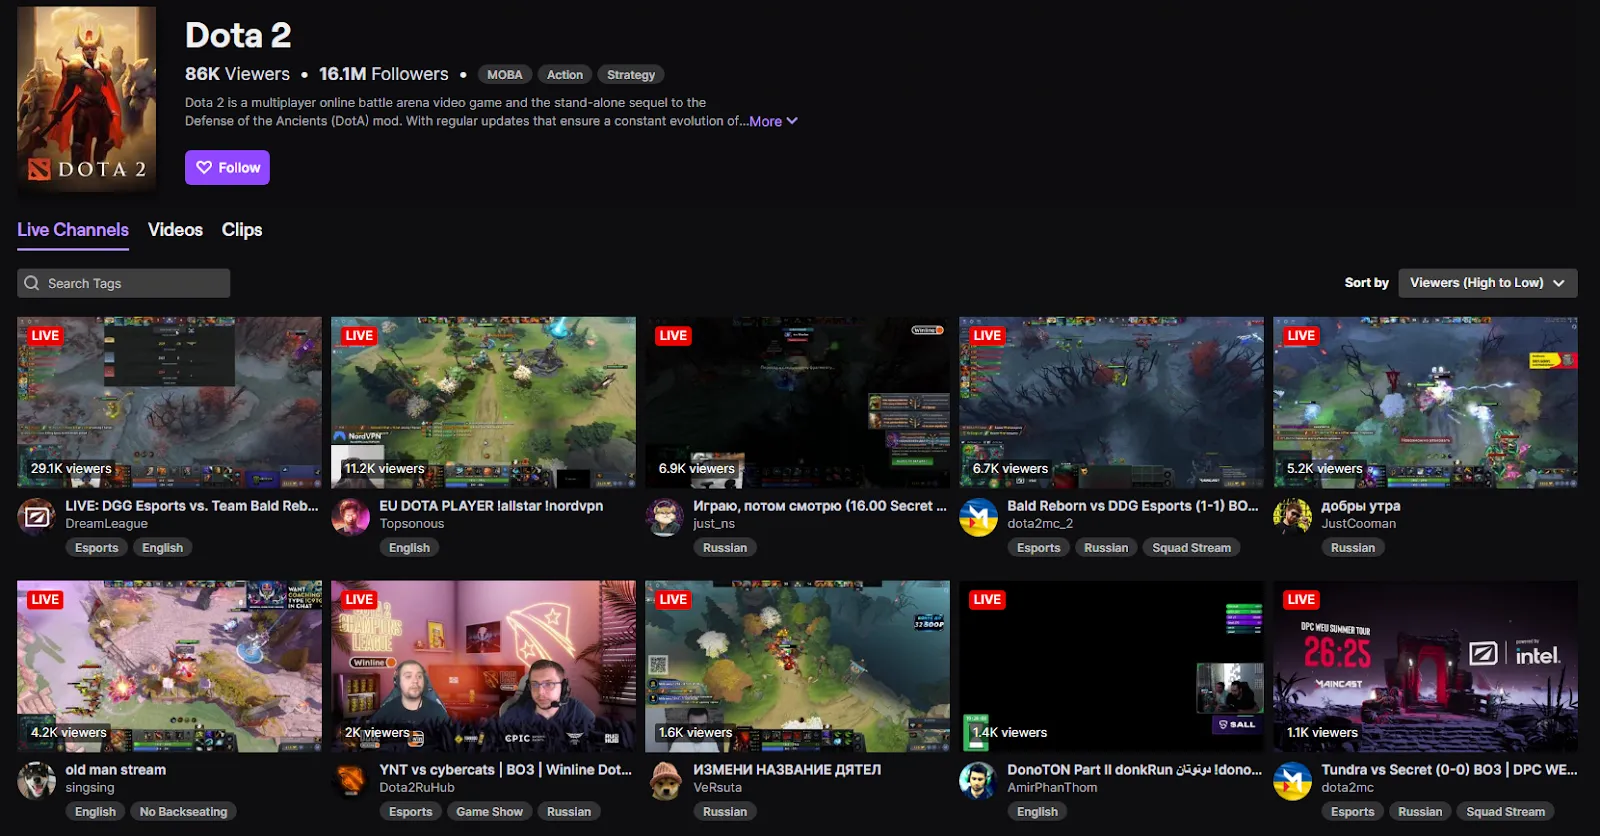 Dota 2 has over 16 million followers on Twitch, but even so, it will be quite difficult to get noticed.